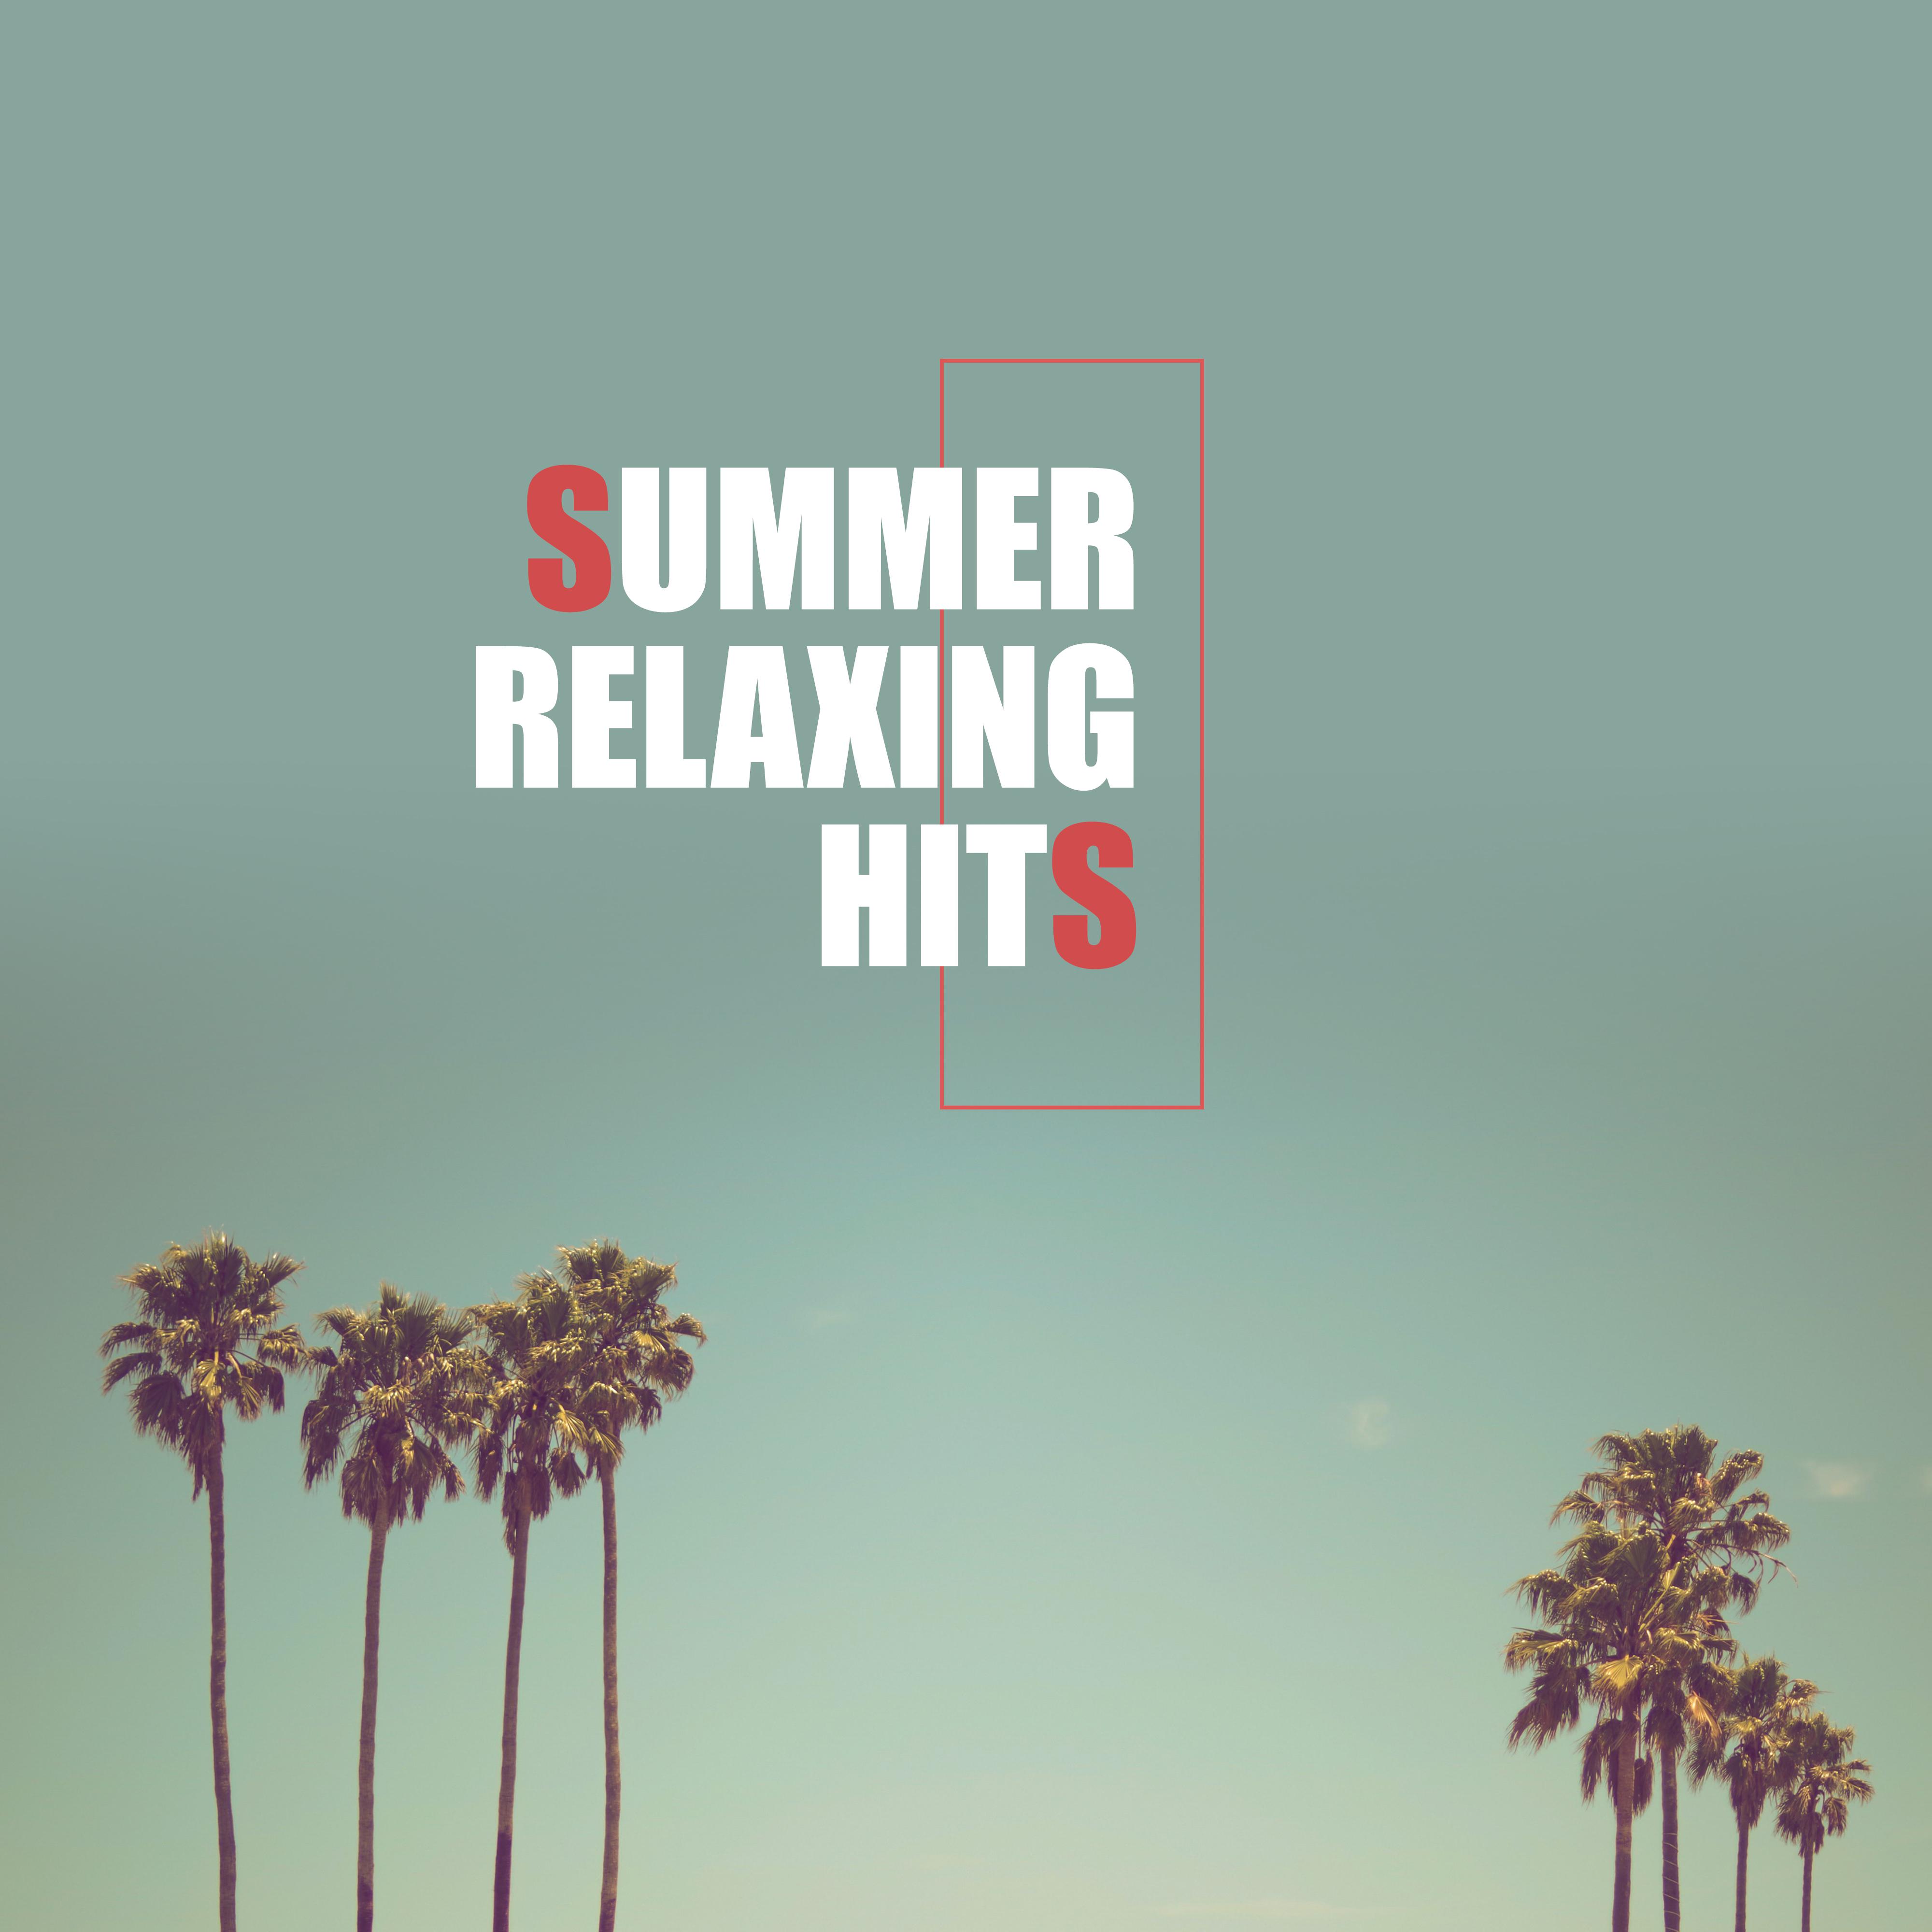 Summer Relaxing Hits – Ibiza 2019, Dance Music, Sunny Chill Out, Summer Music 2019, Ibiza Lounge, Beach Party